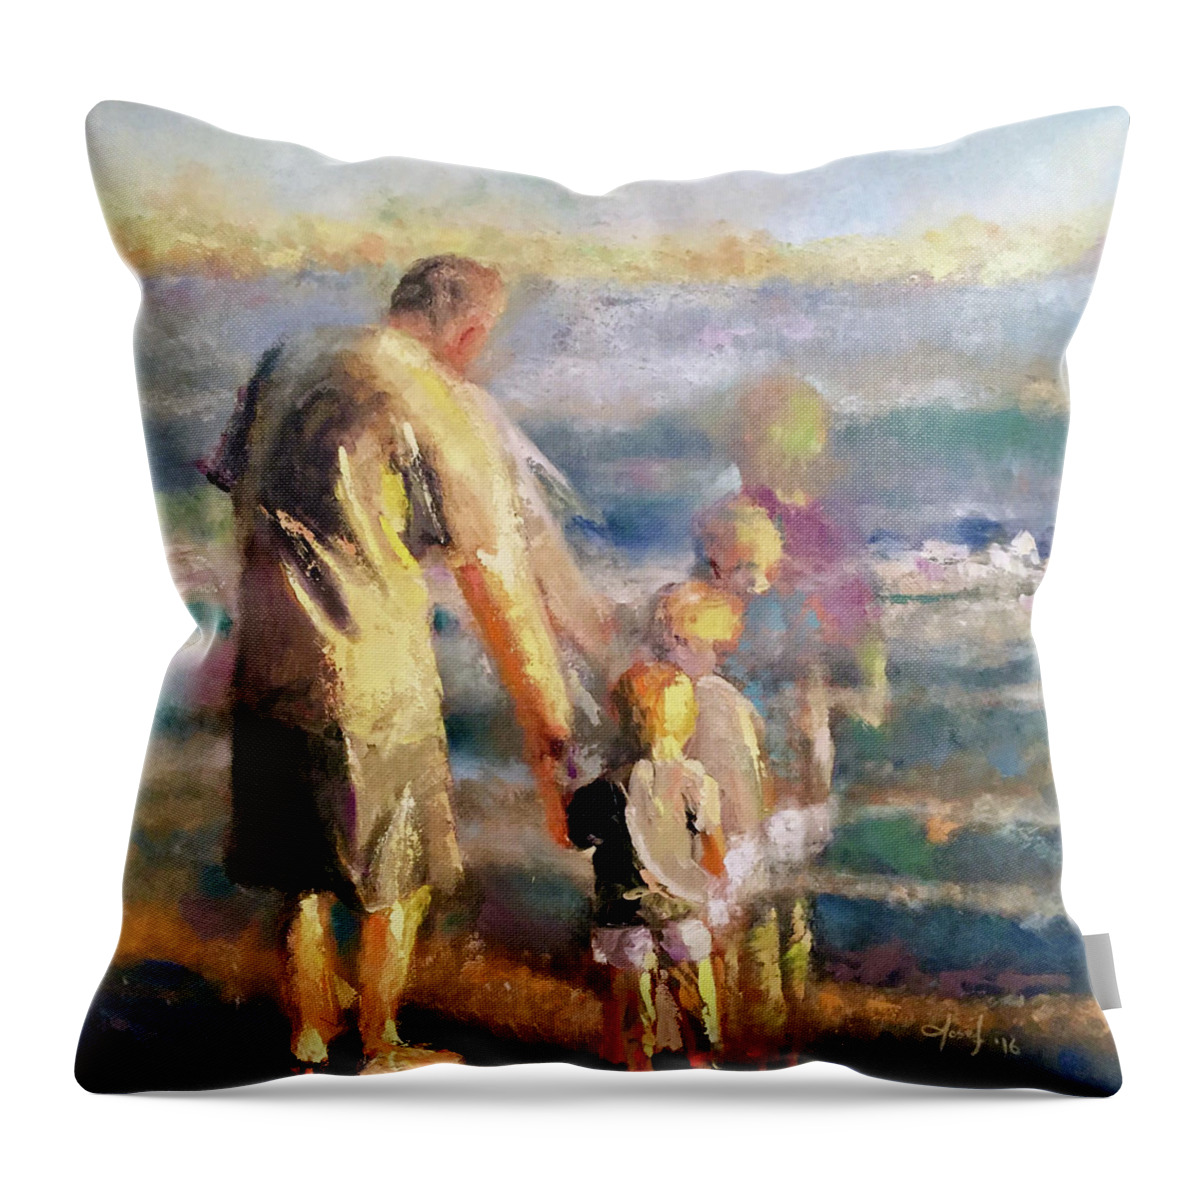  Throw Pillow featuring the painting Grandpa Dino by Josef Kelly